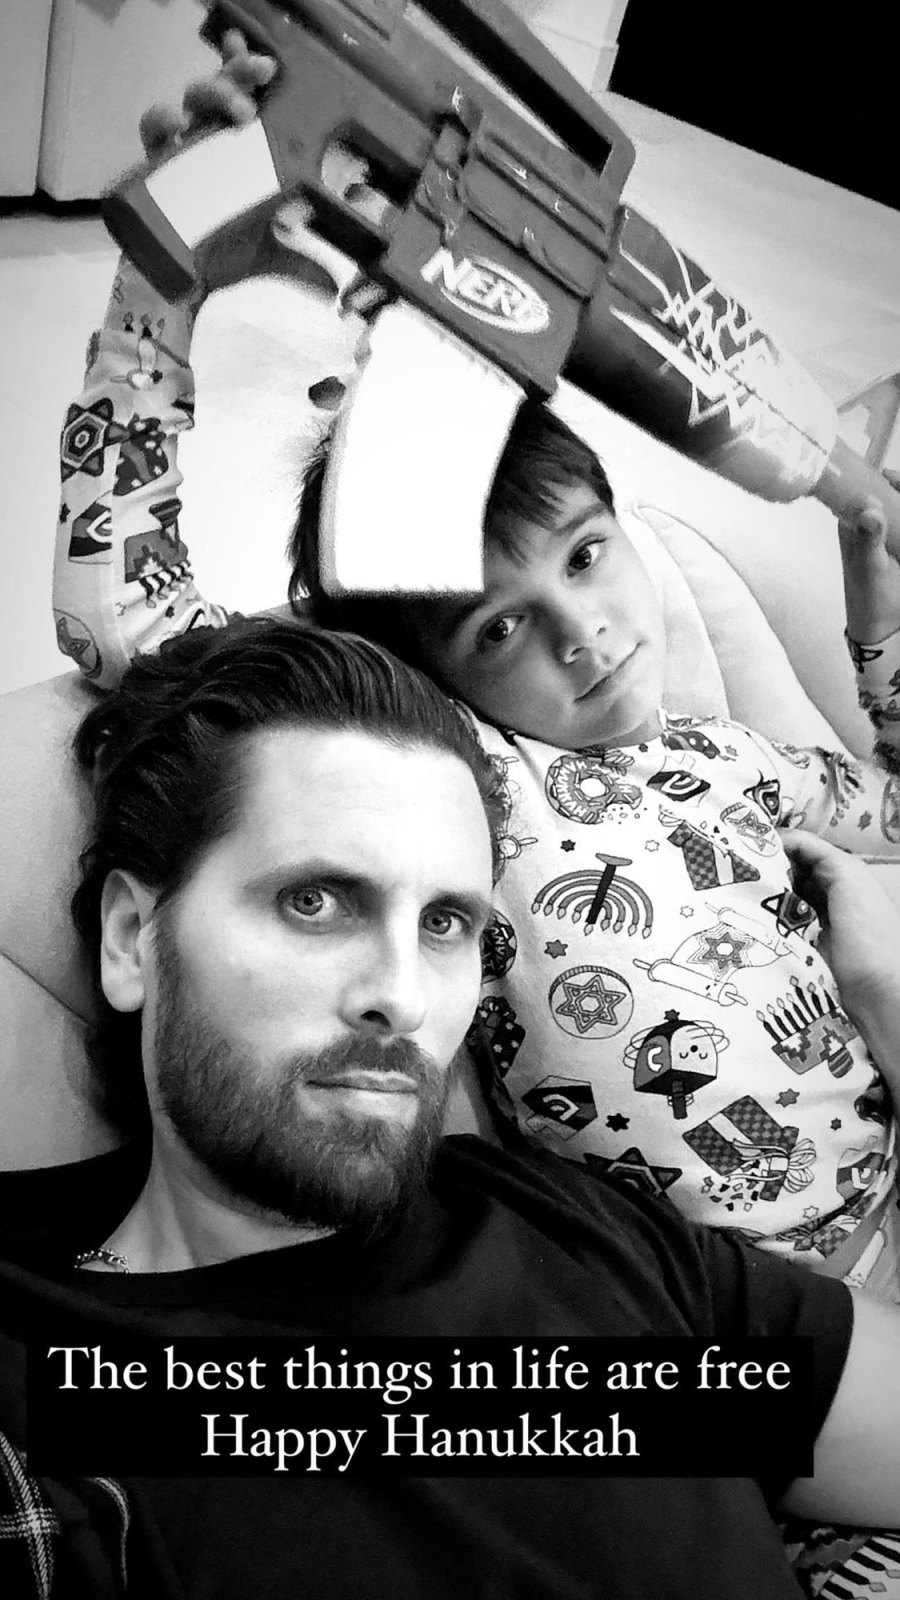 Scott Disicks Son Reign acc Cute Hanukkah Pajamas on 2nd Night Best Things in Life Are Free